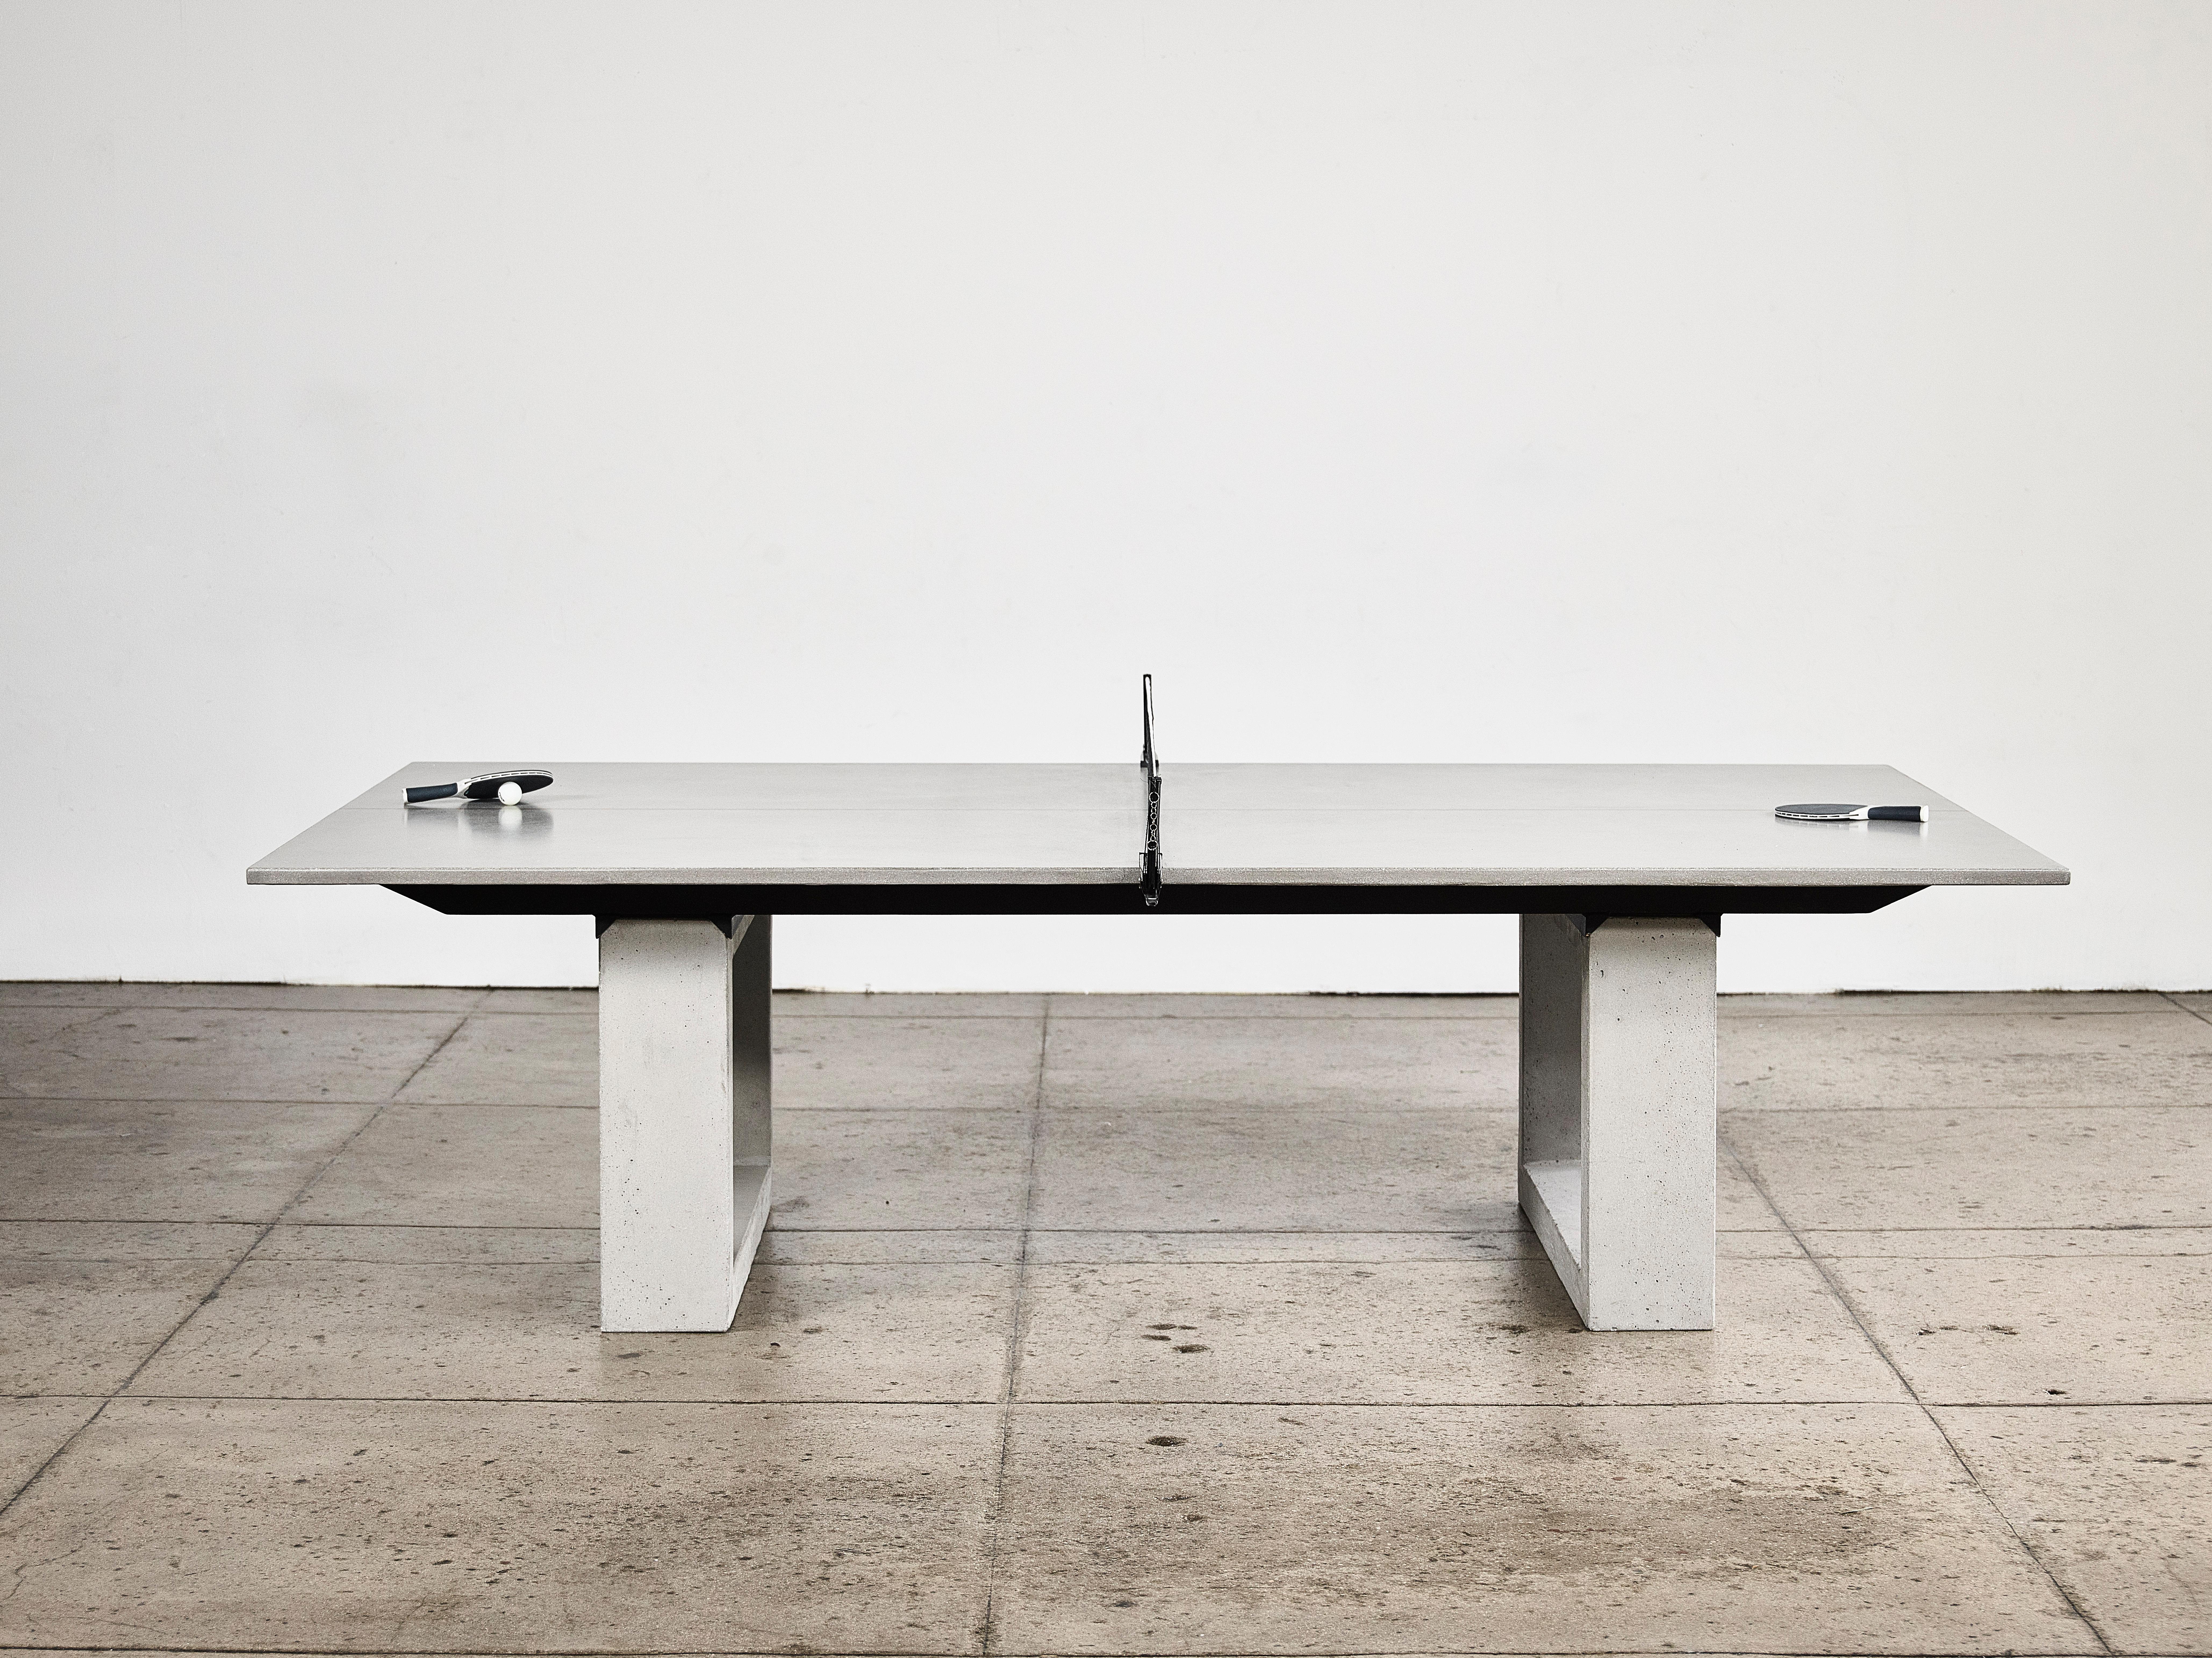 James de Wulf custom contemporary concrete Ping-Pong Table. 
Regulation sized with acid stained center line and carbon fiber reinforcement. 
Add seating to welcome guests as a dining table. Seats 10-12 guests comfortably.

Tables are sealed with a